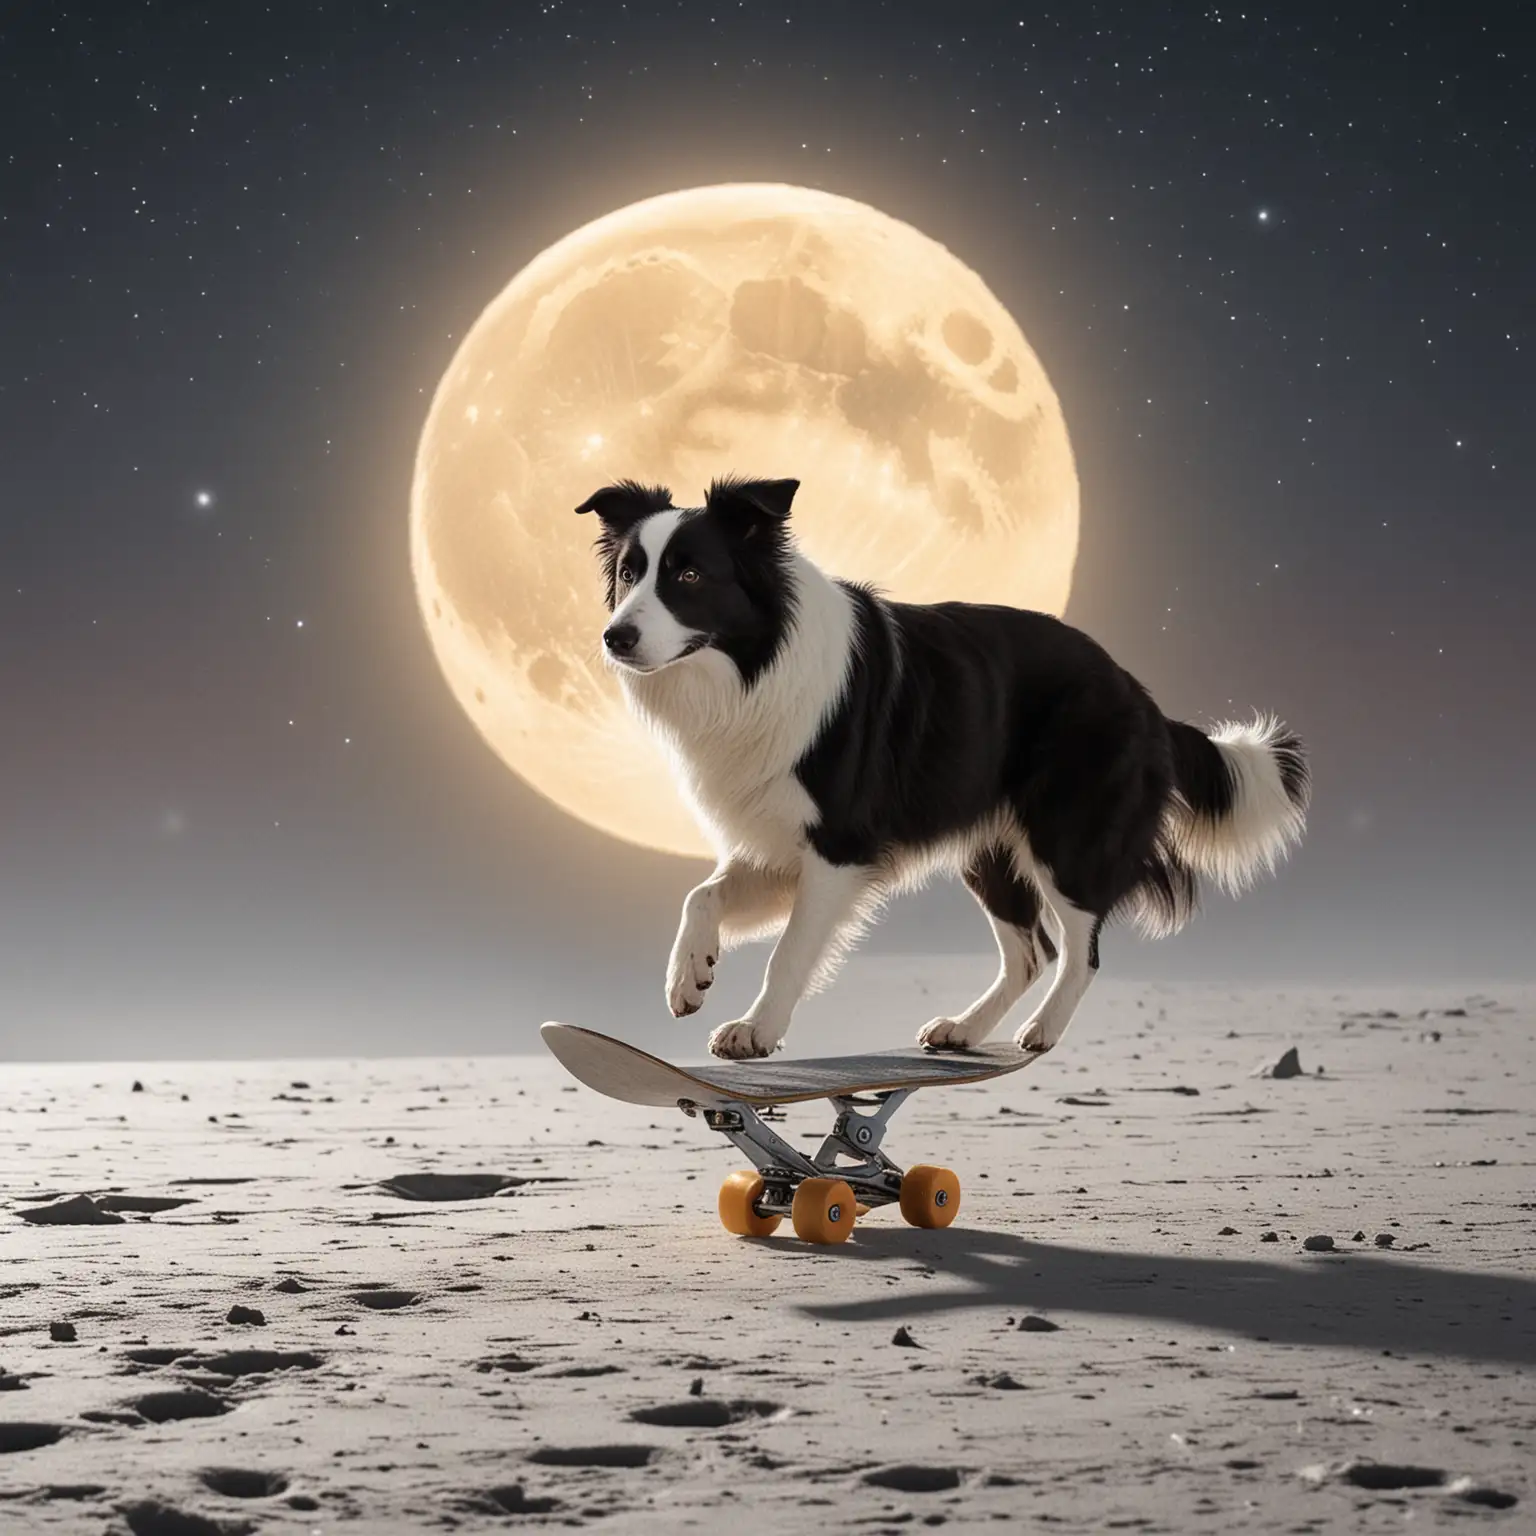 Border collie skating on the moon